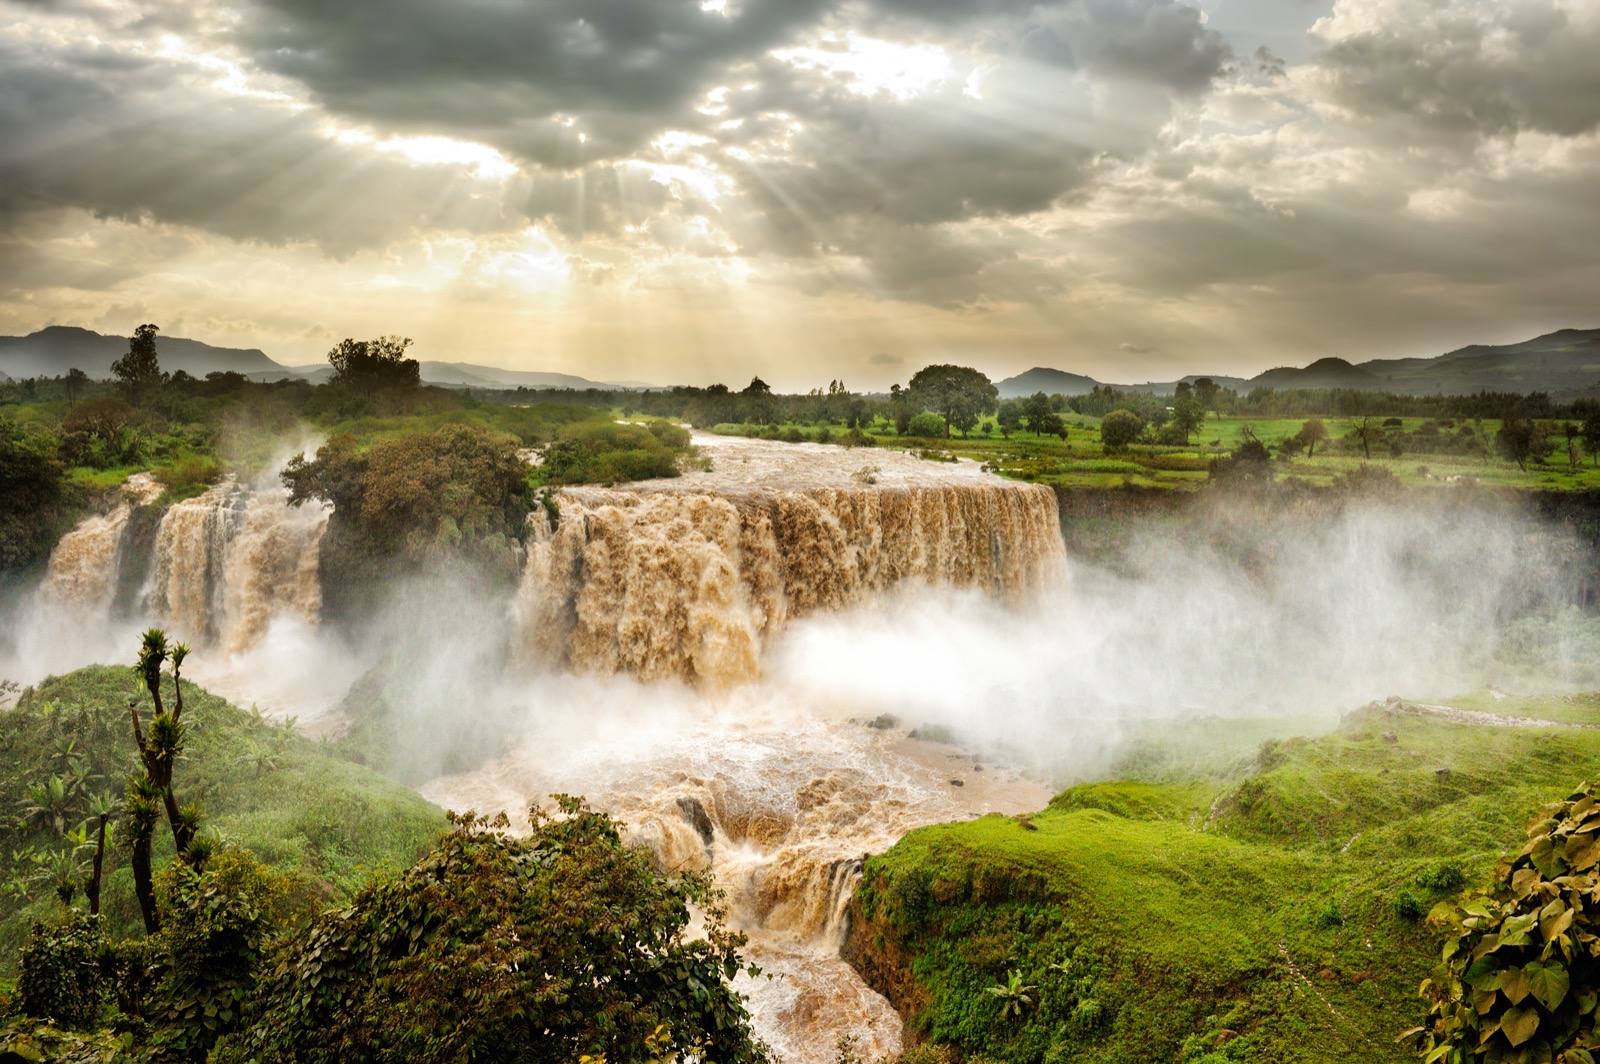 So You Think You’re Great at General Knowledge, Eh? Prove It With This Quiz Nile Falls